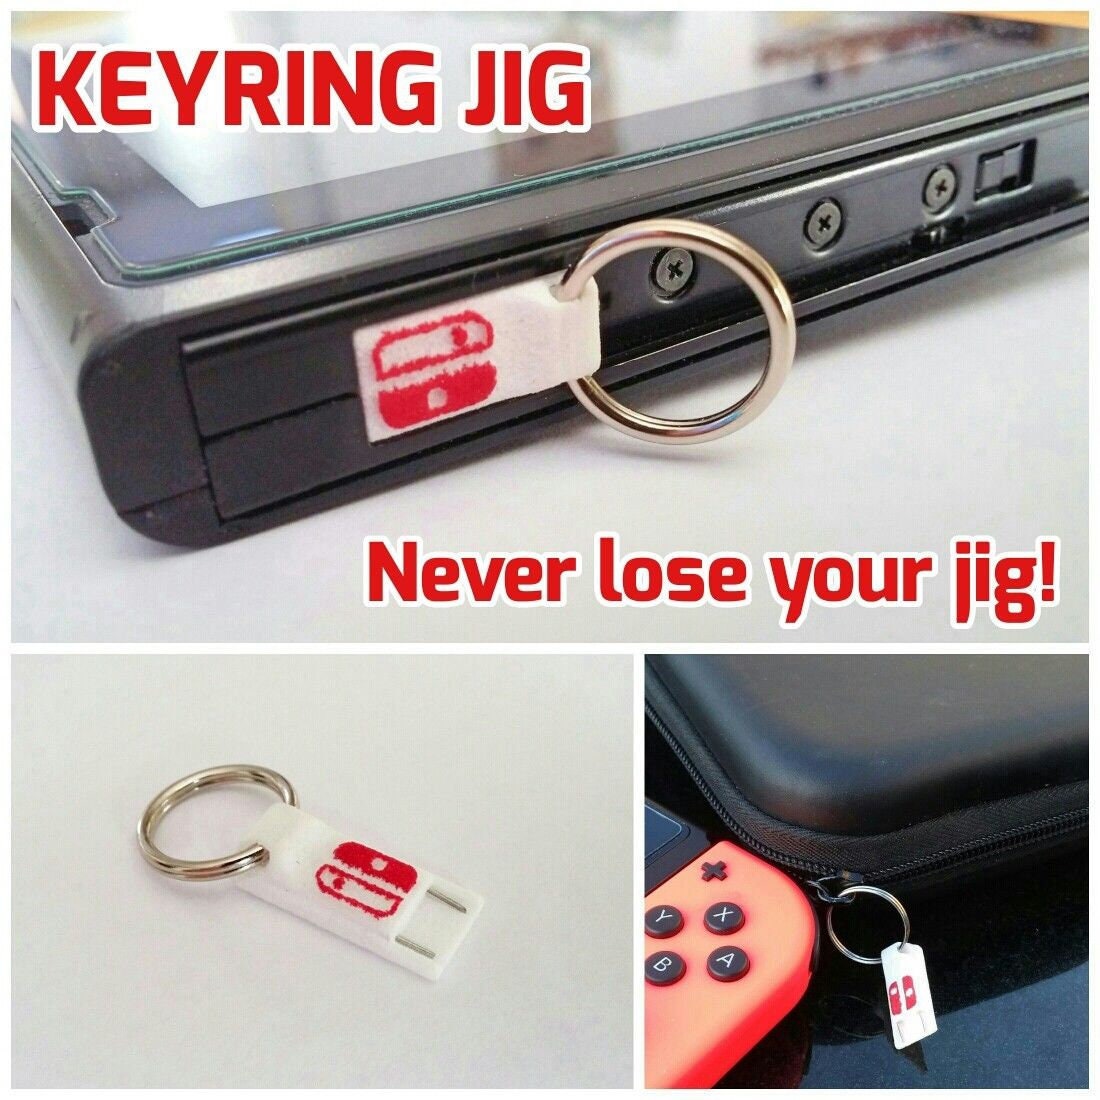 Nintendo Switch RCM Jig Keyring joycon mod for recovery mode Hack - Load  Linux!!